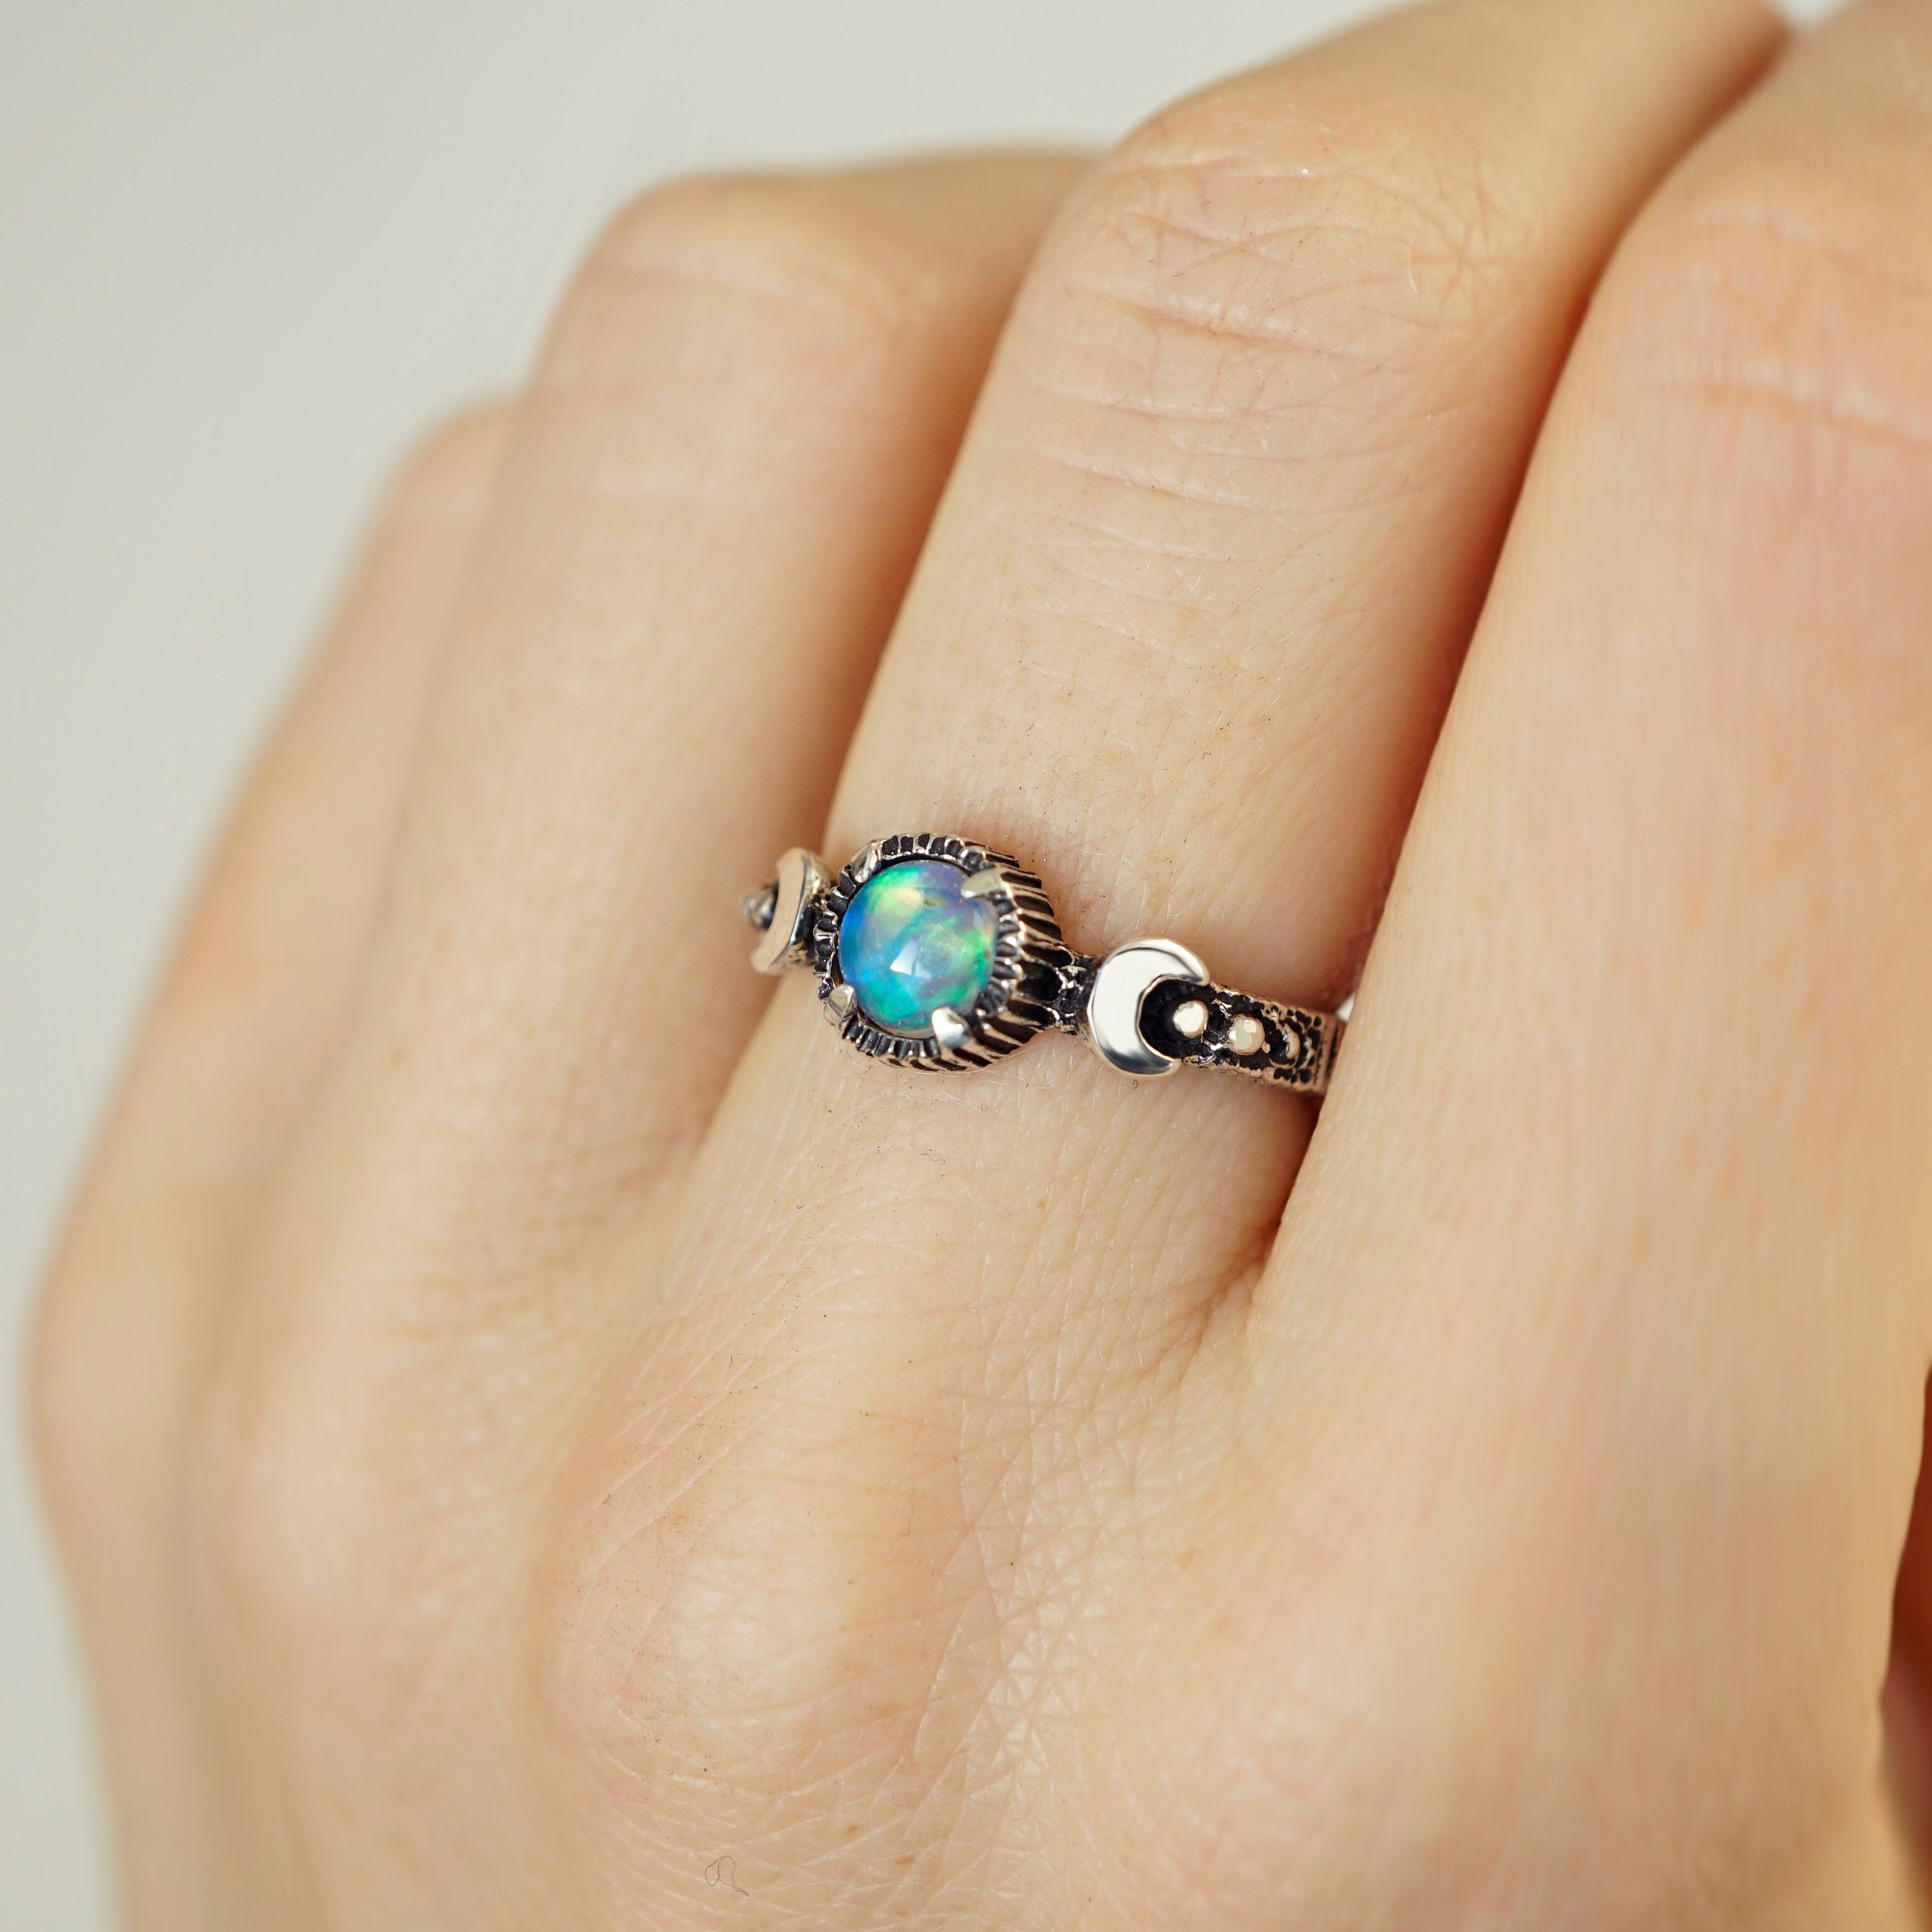 Opal engagement ring, Valentines Day gift, Moon Ring, Fire opal ring, Moon phases ring, Sun and moon ring, Triple Goddess ring 